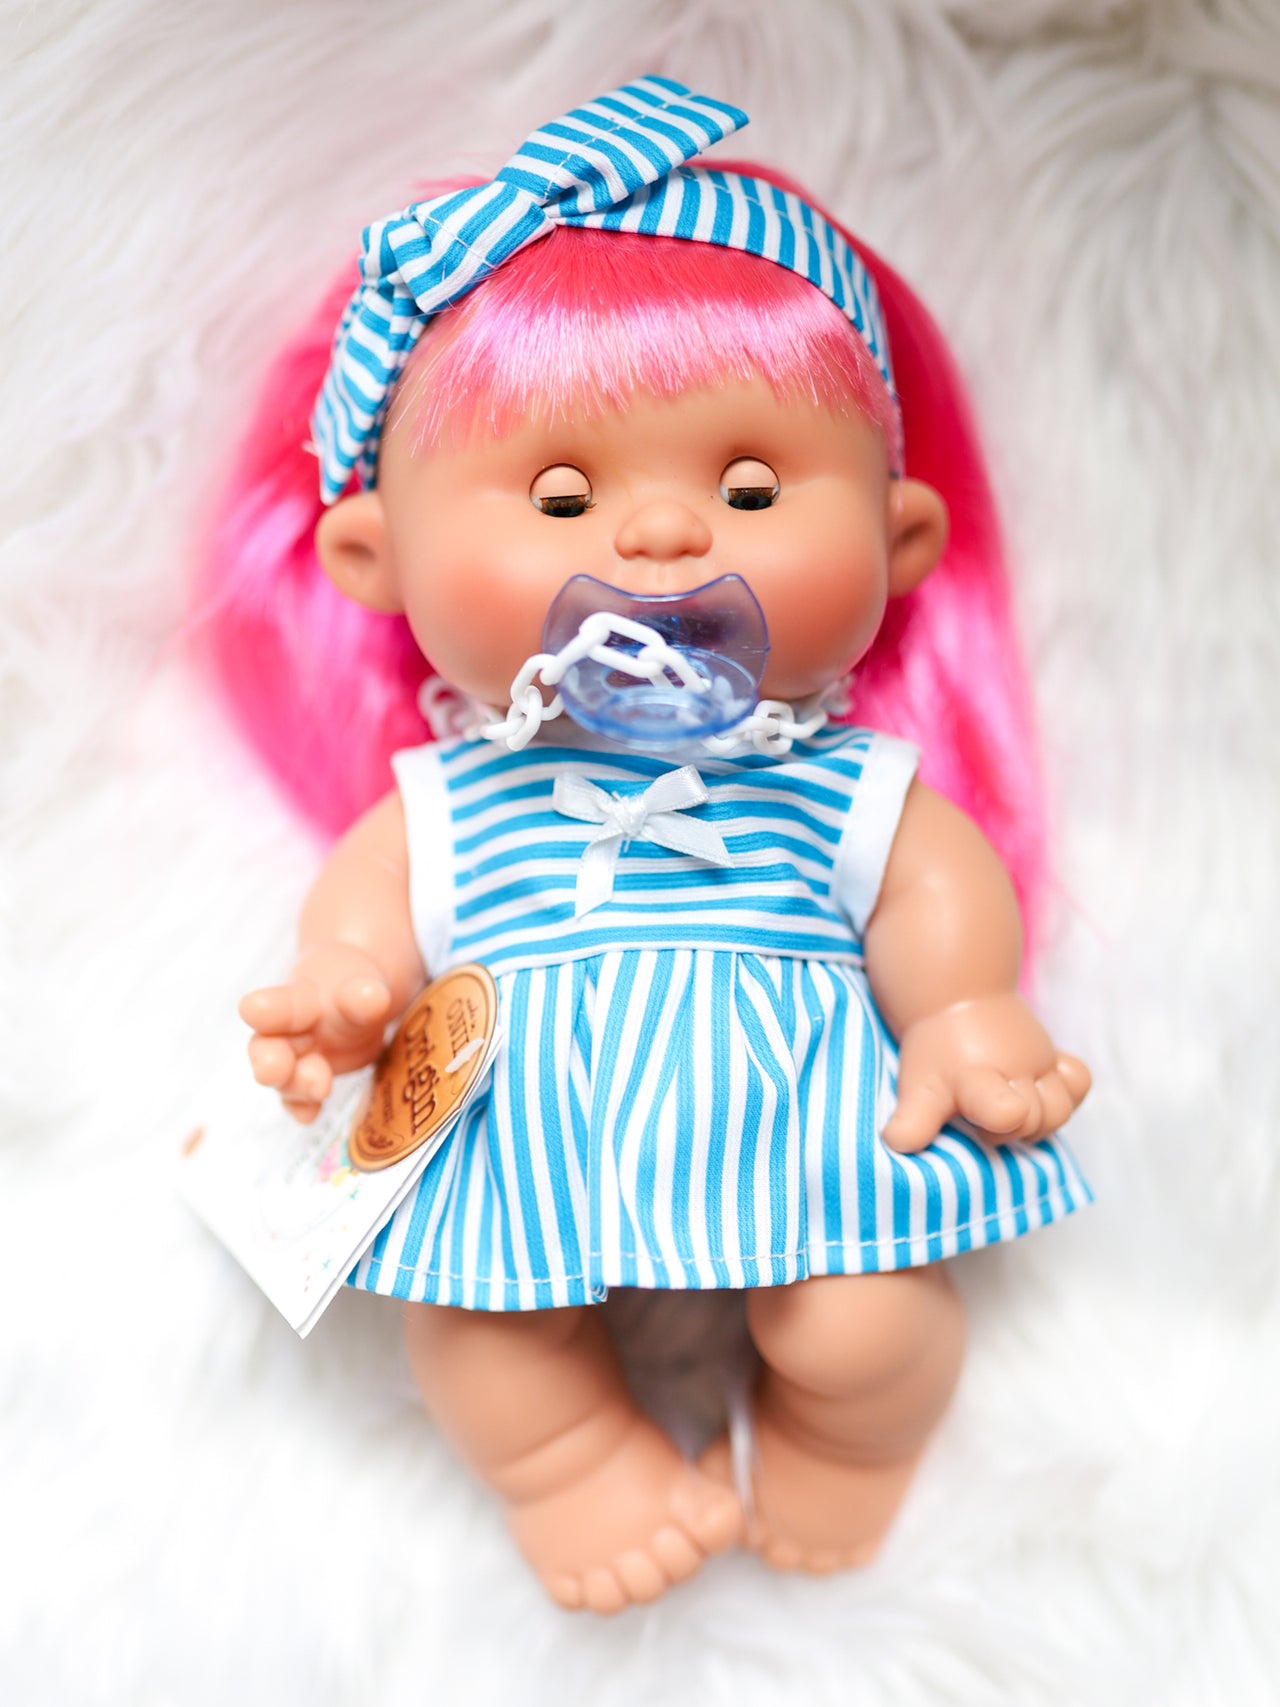 Louisa - Authentic Pepotes 10.2" Girl Doll with Hot Pink Hair and Sleepy Eyes